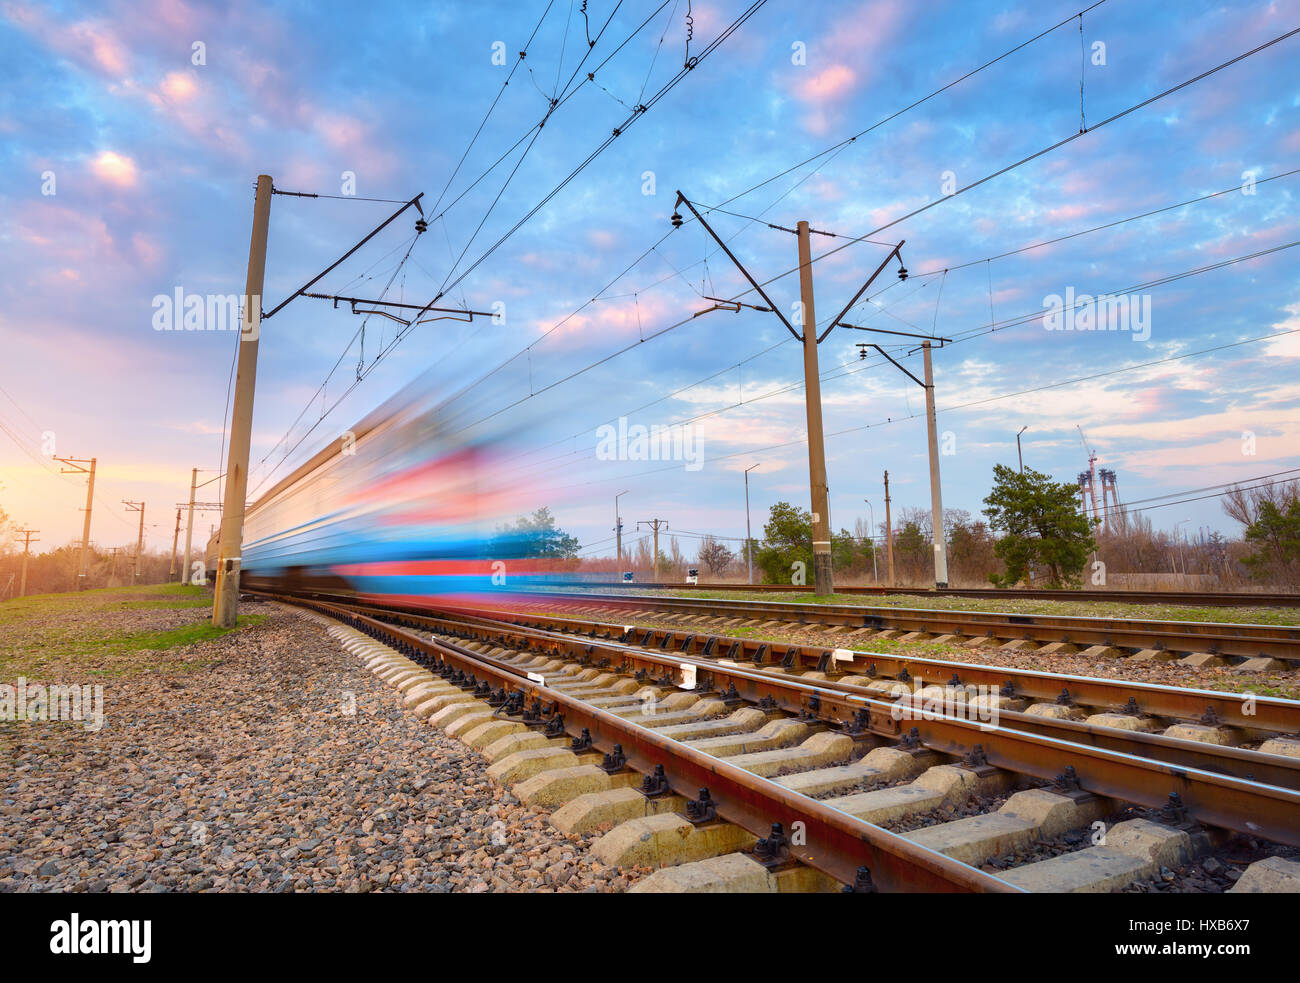 High speed blue passenger train in motion on railroad at sunset. Blurred commuter train. Railway station against colorful sky. Railroad travel, railwa Stock Photo